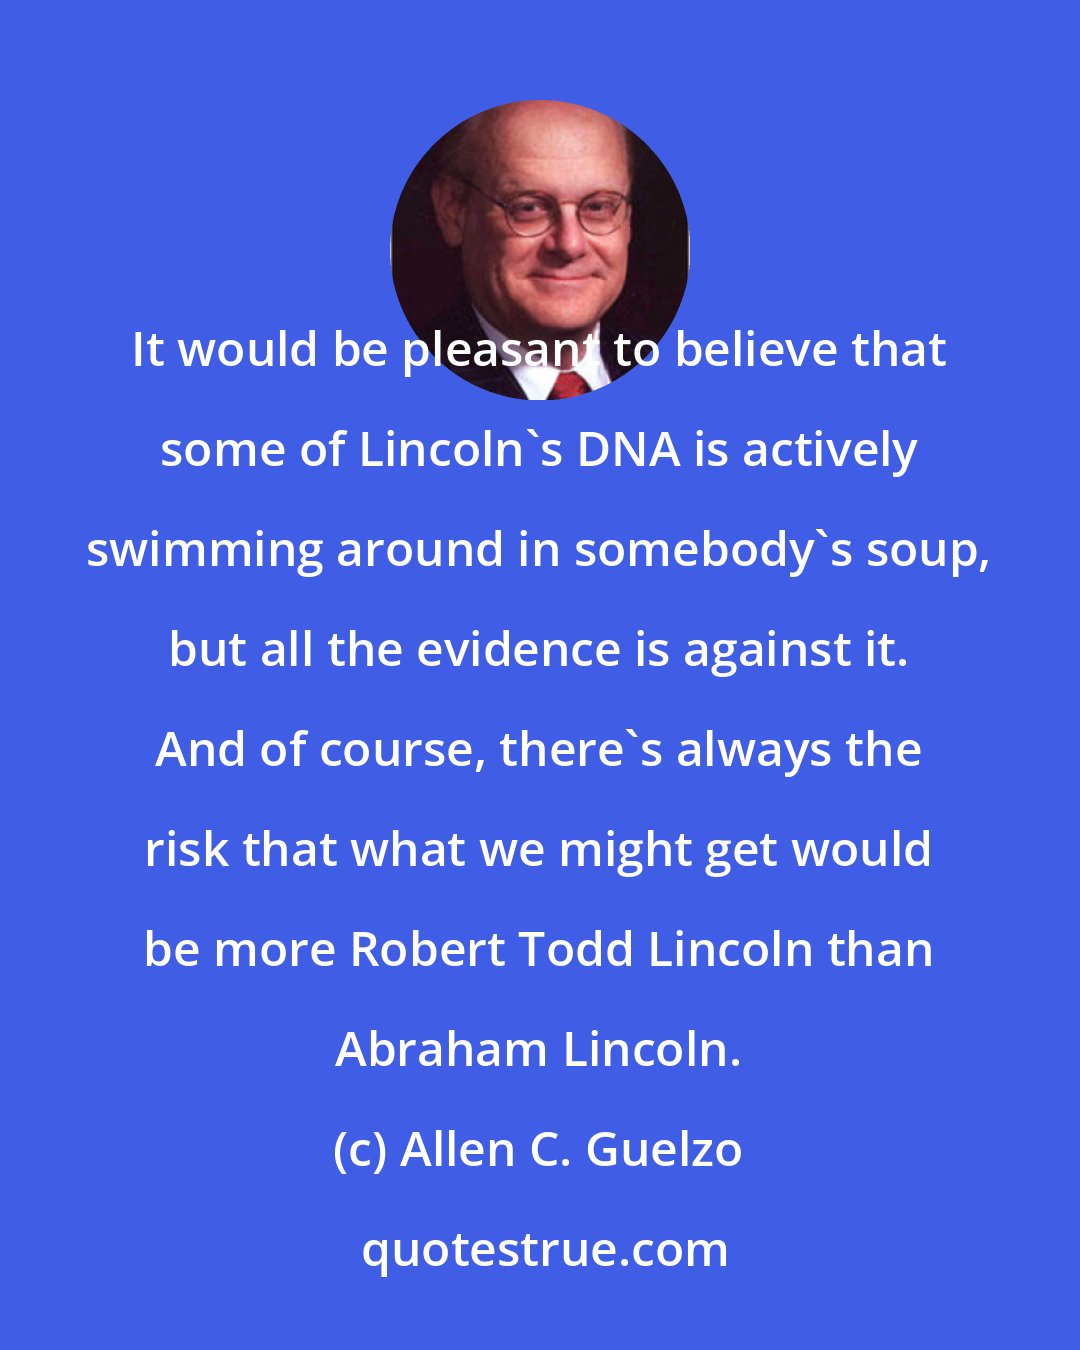 Allen C. Guelzo: It would be pleasant to believe that some of Lincoln's DNA is actively swimming around in somebody's soup, but all the evidence is against it. And of course, there's always the risk that what we might get would be more Robert Todd Lincoln than Abraham Lincoln.